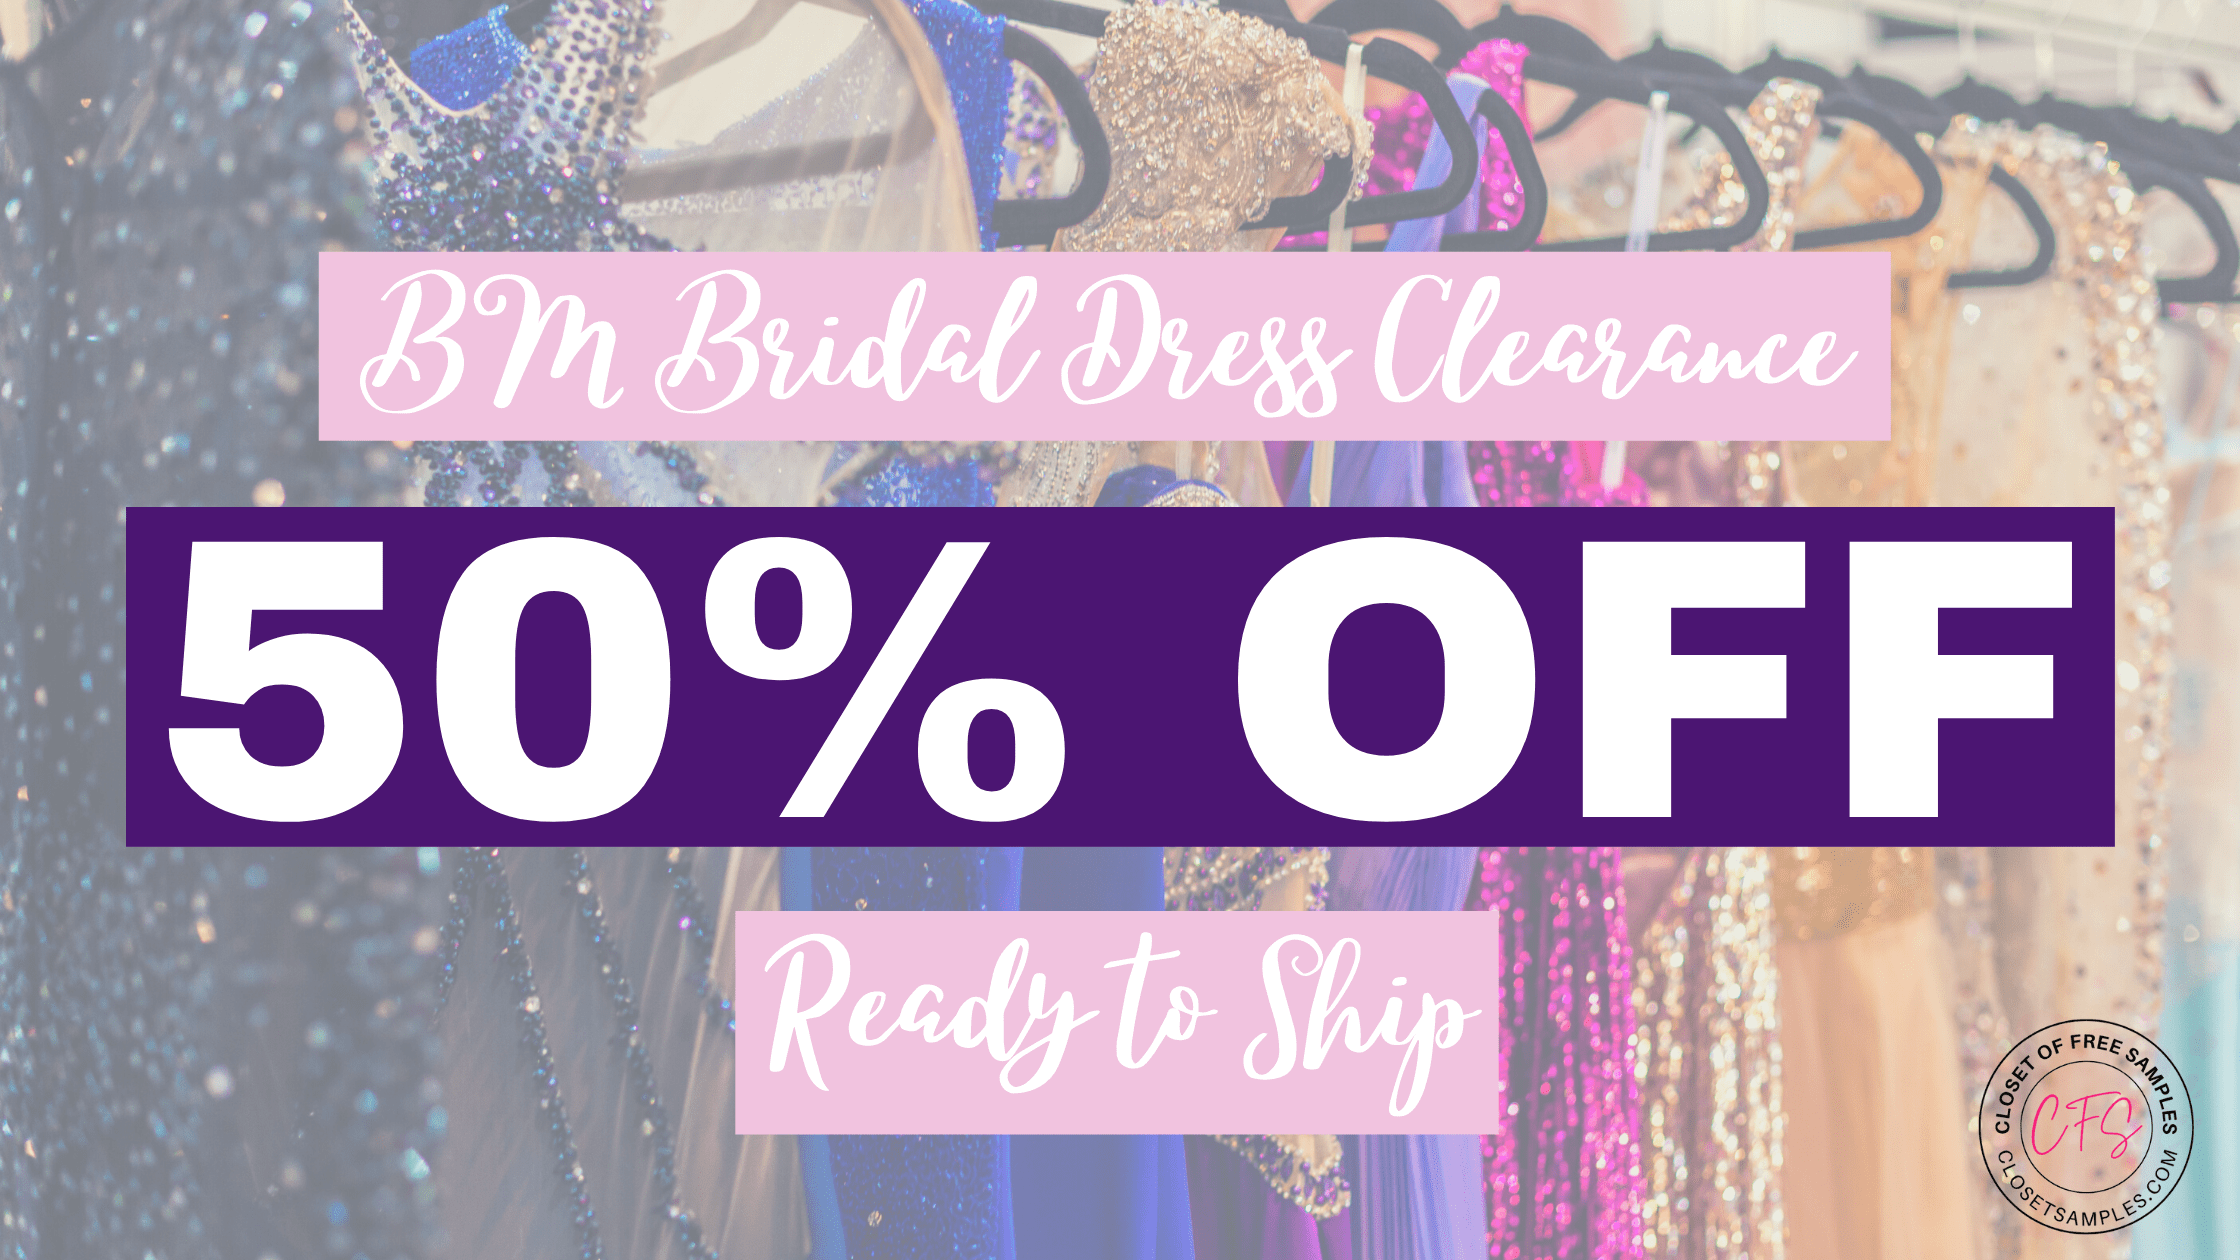 BM Bridal Dress Clearance HALF OFF and Ready to Ship!